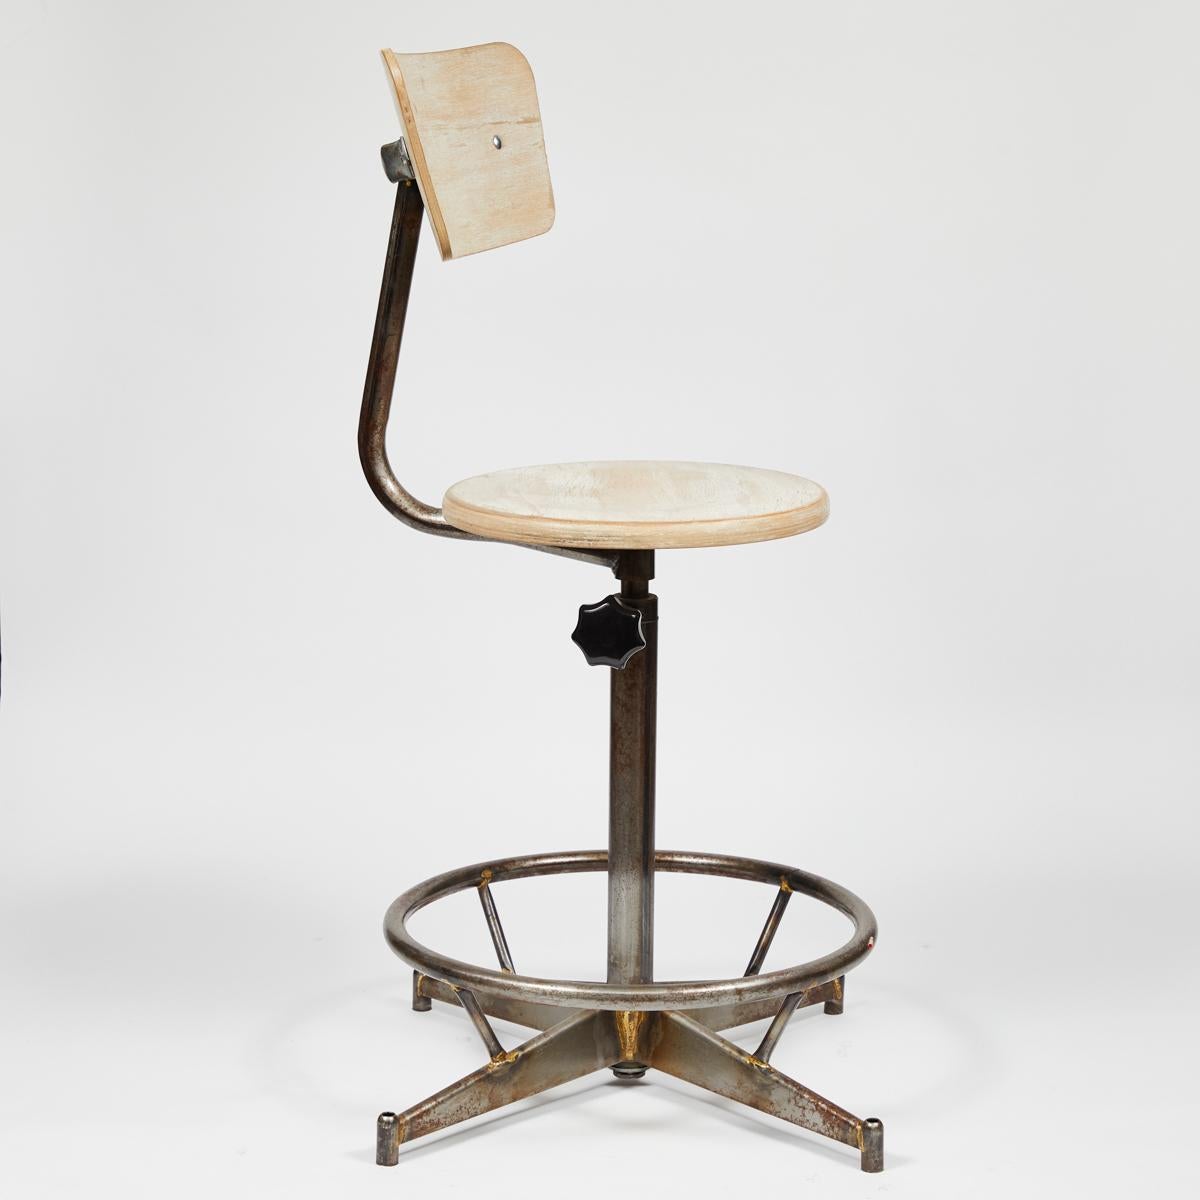 1940s French industrial swivel stool or chair in light blonde wood with adjustable metal base. Featuring a flat circular seat and curved trapezoidal back, the chair sits on a pedestal base with a circular foot-rest and four thin wedge-shaped legs.